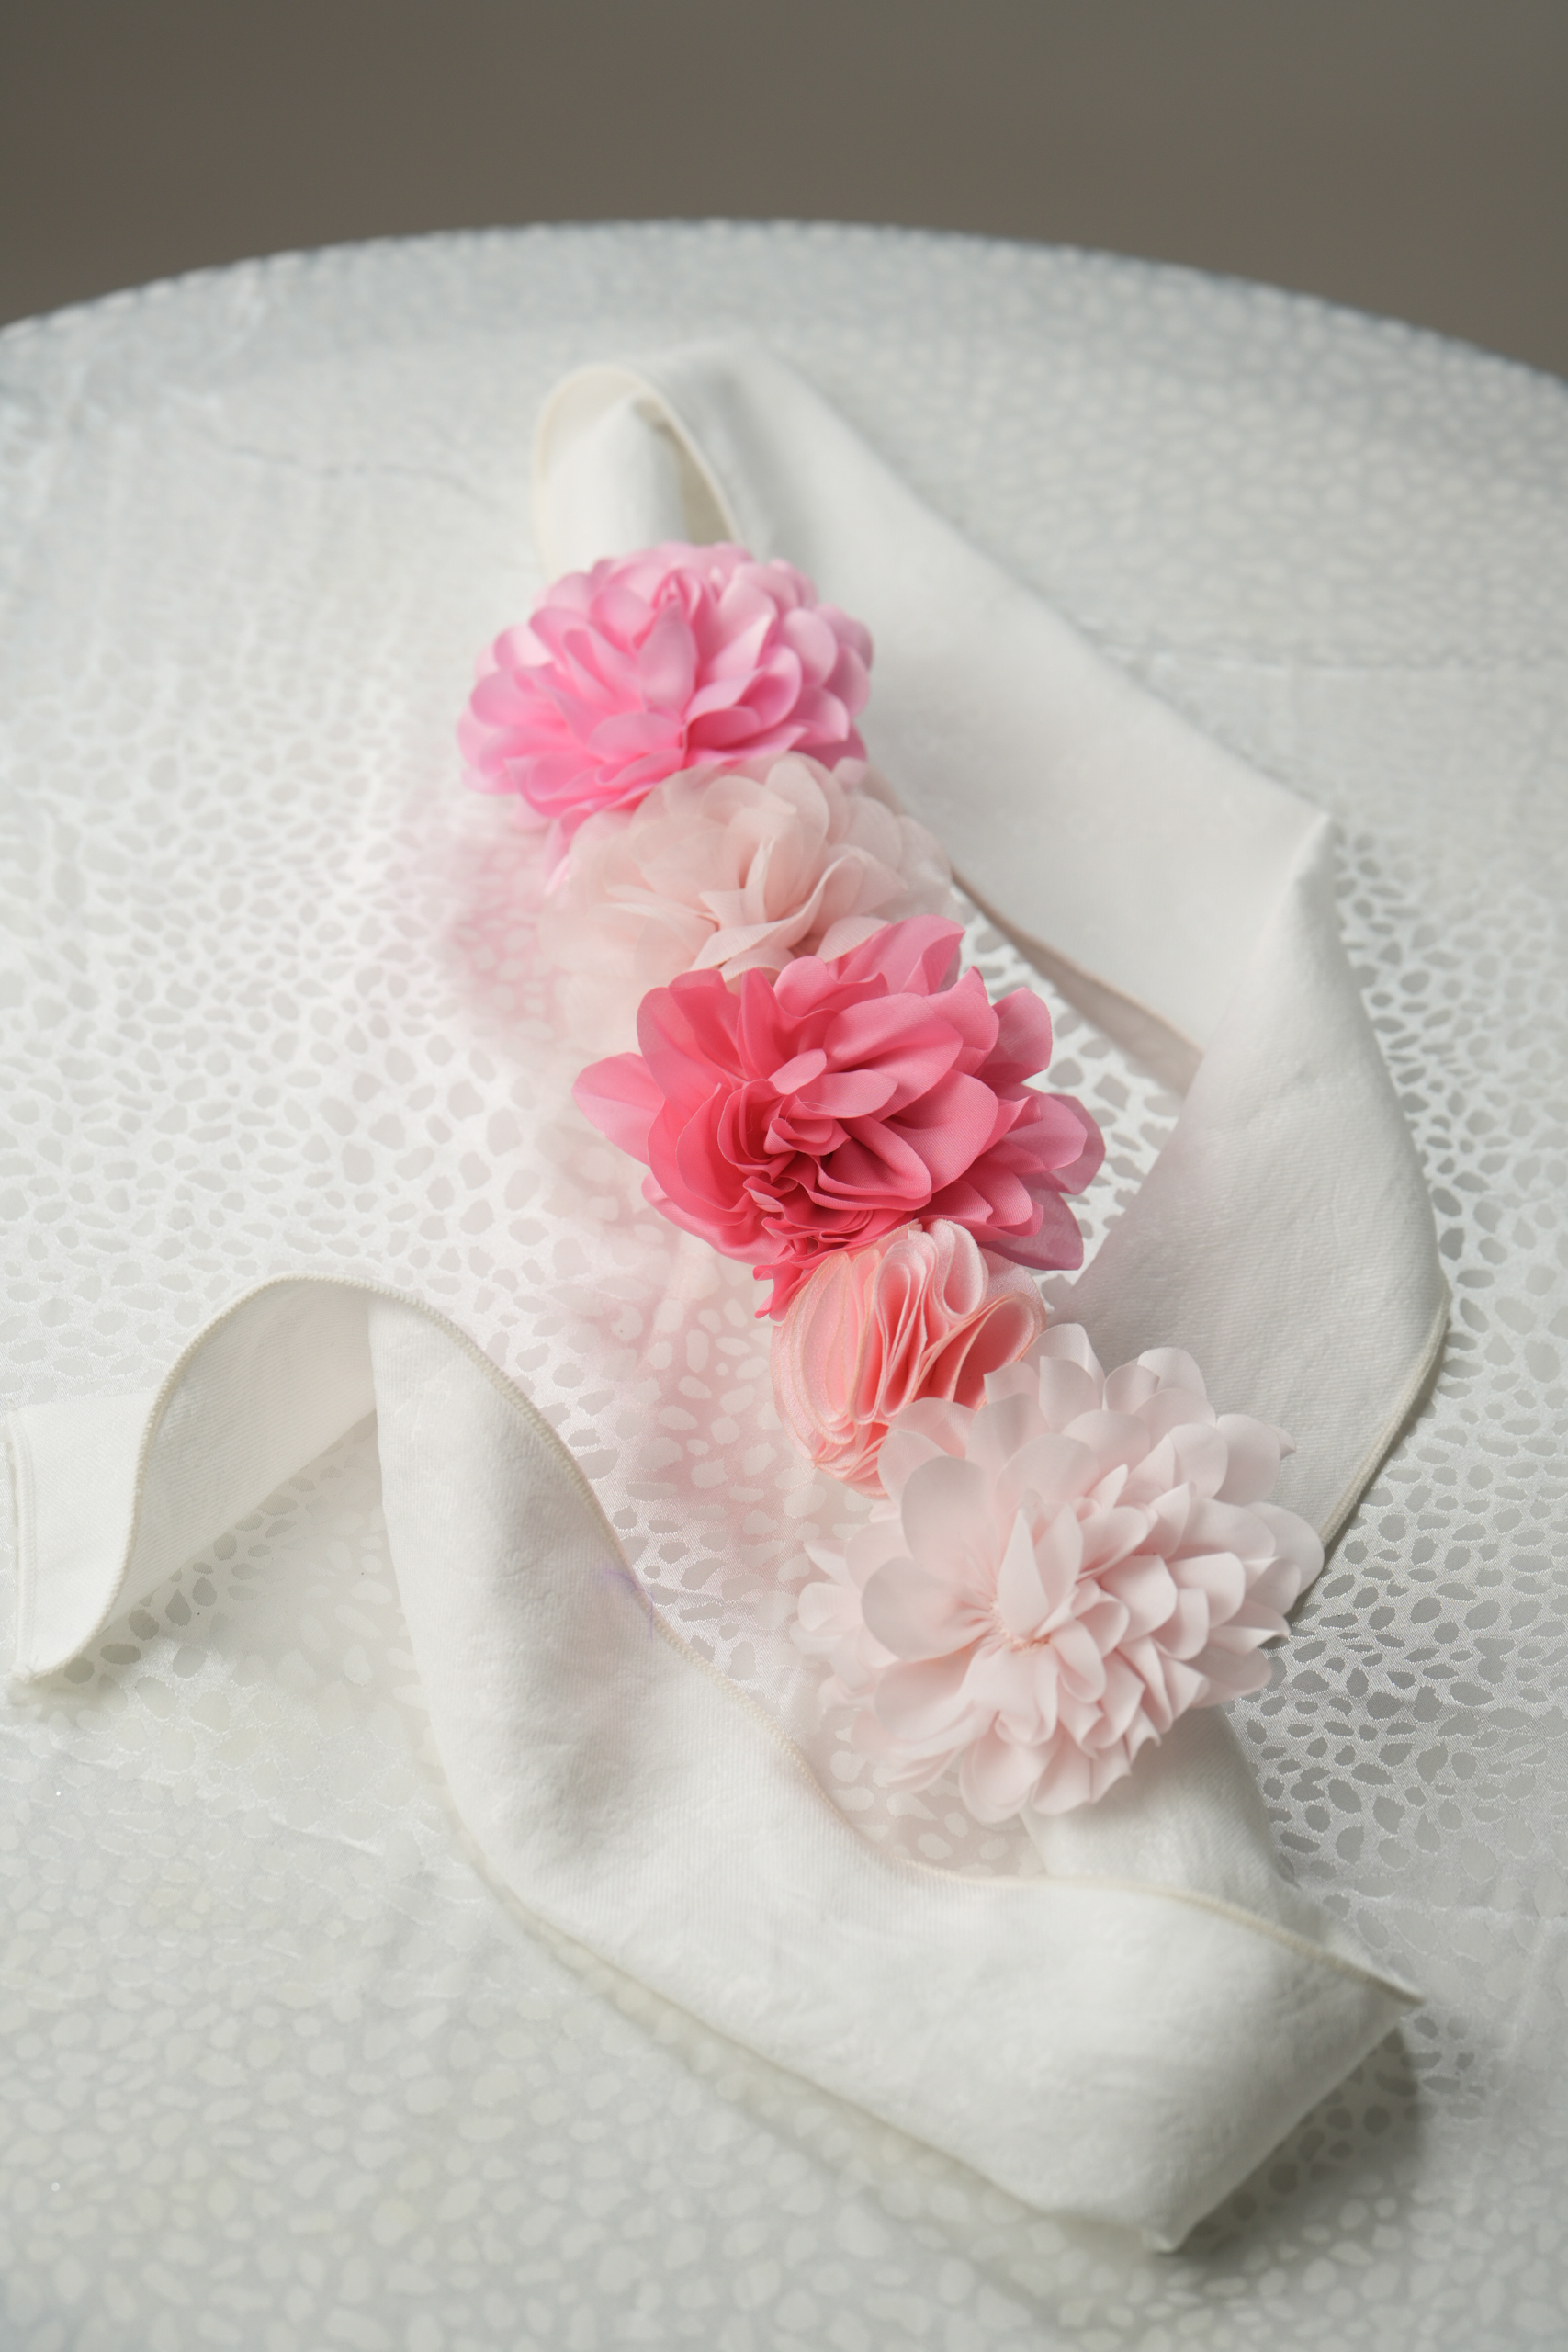 White Headband with pink flowers (headscarf not included)